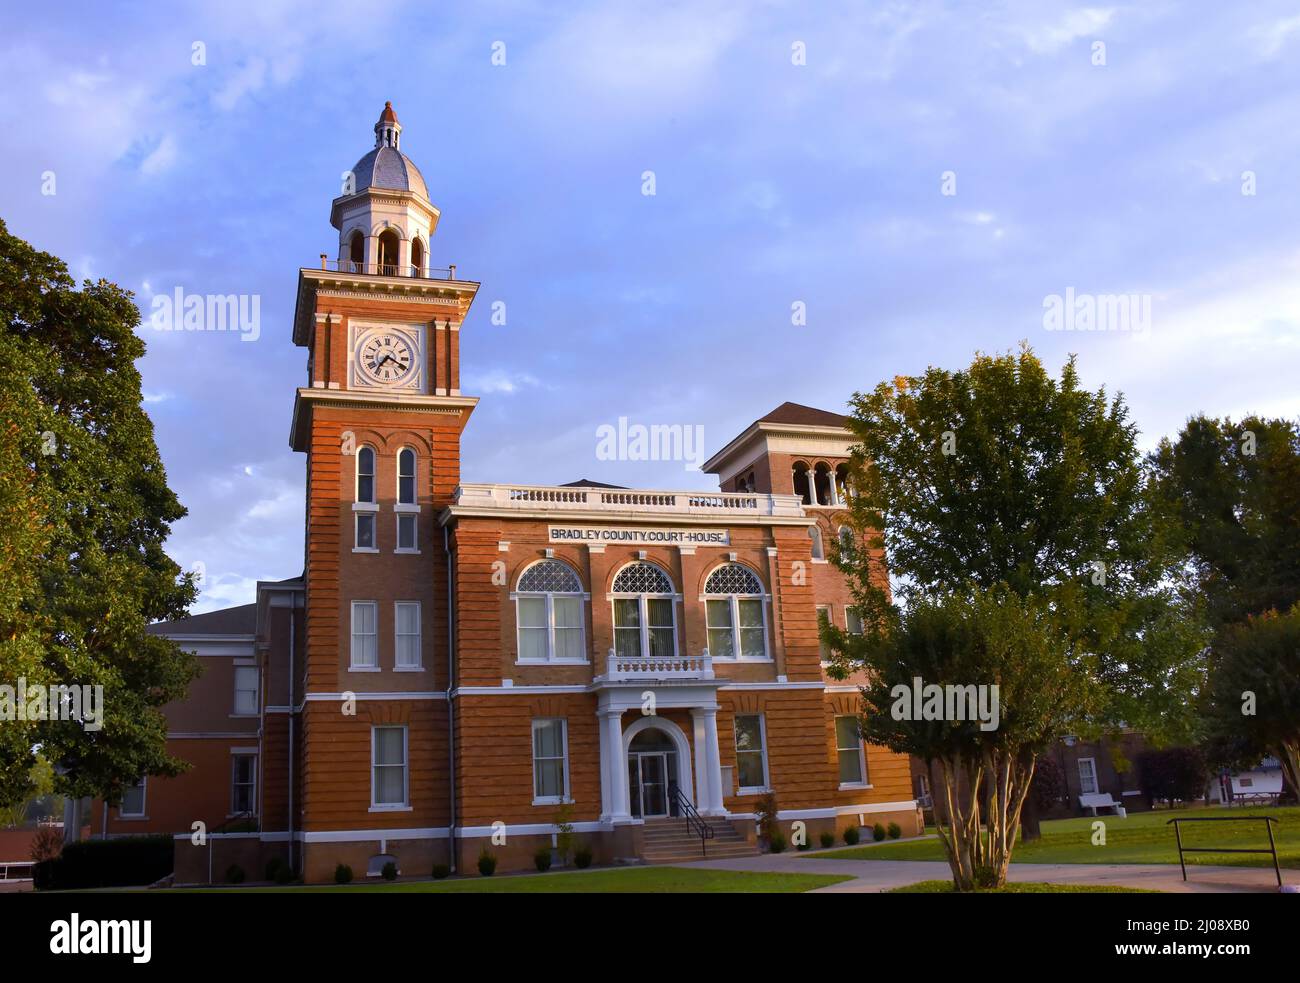 Morning sunlight illuminates the clock tower of Arkansas' Bradley County Courthouse.  Building is tan and orange bricked with a coppola topped dome. Stock Photo